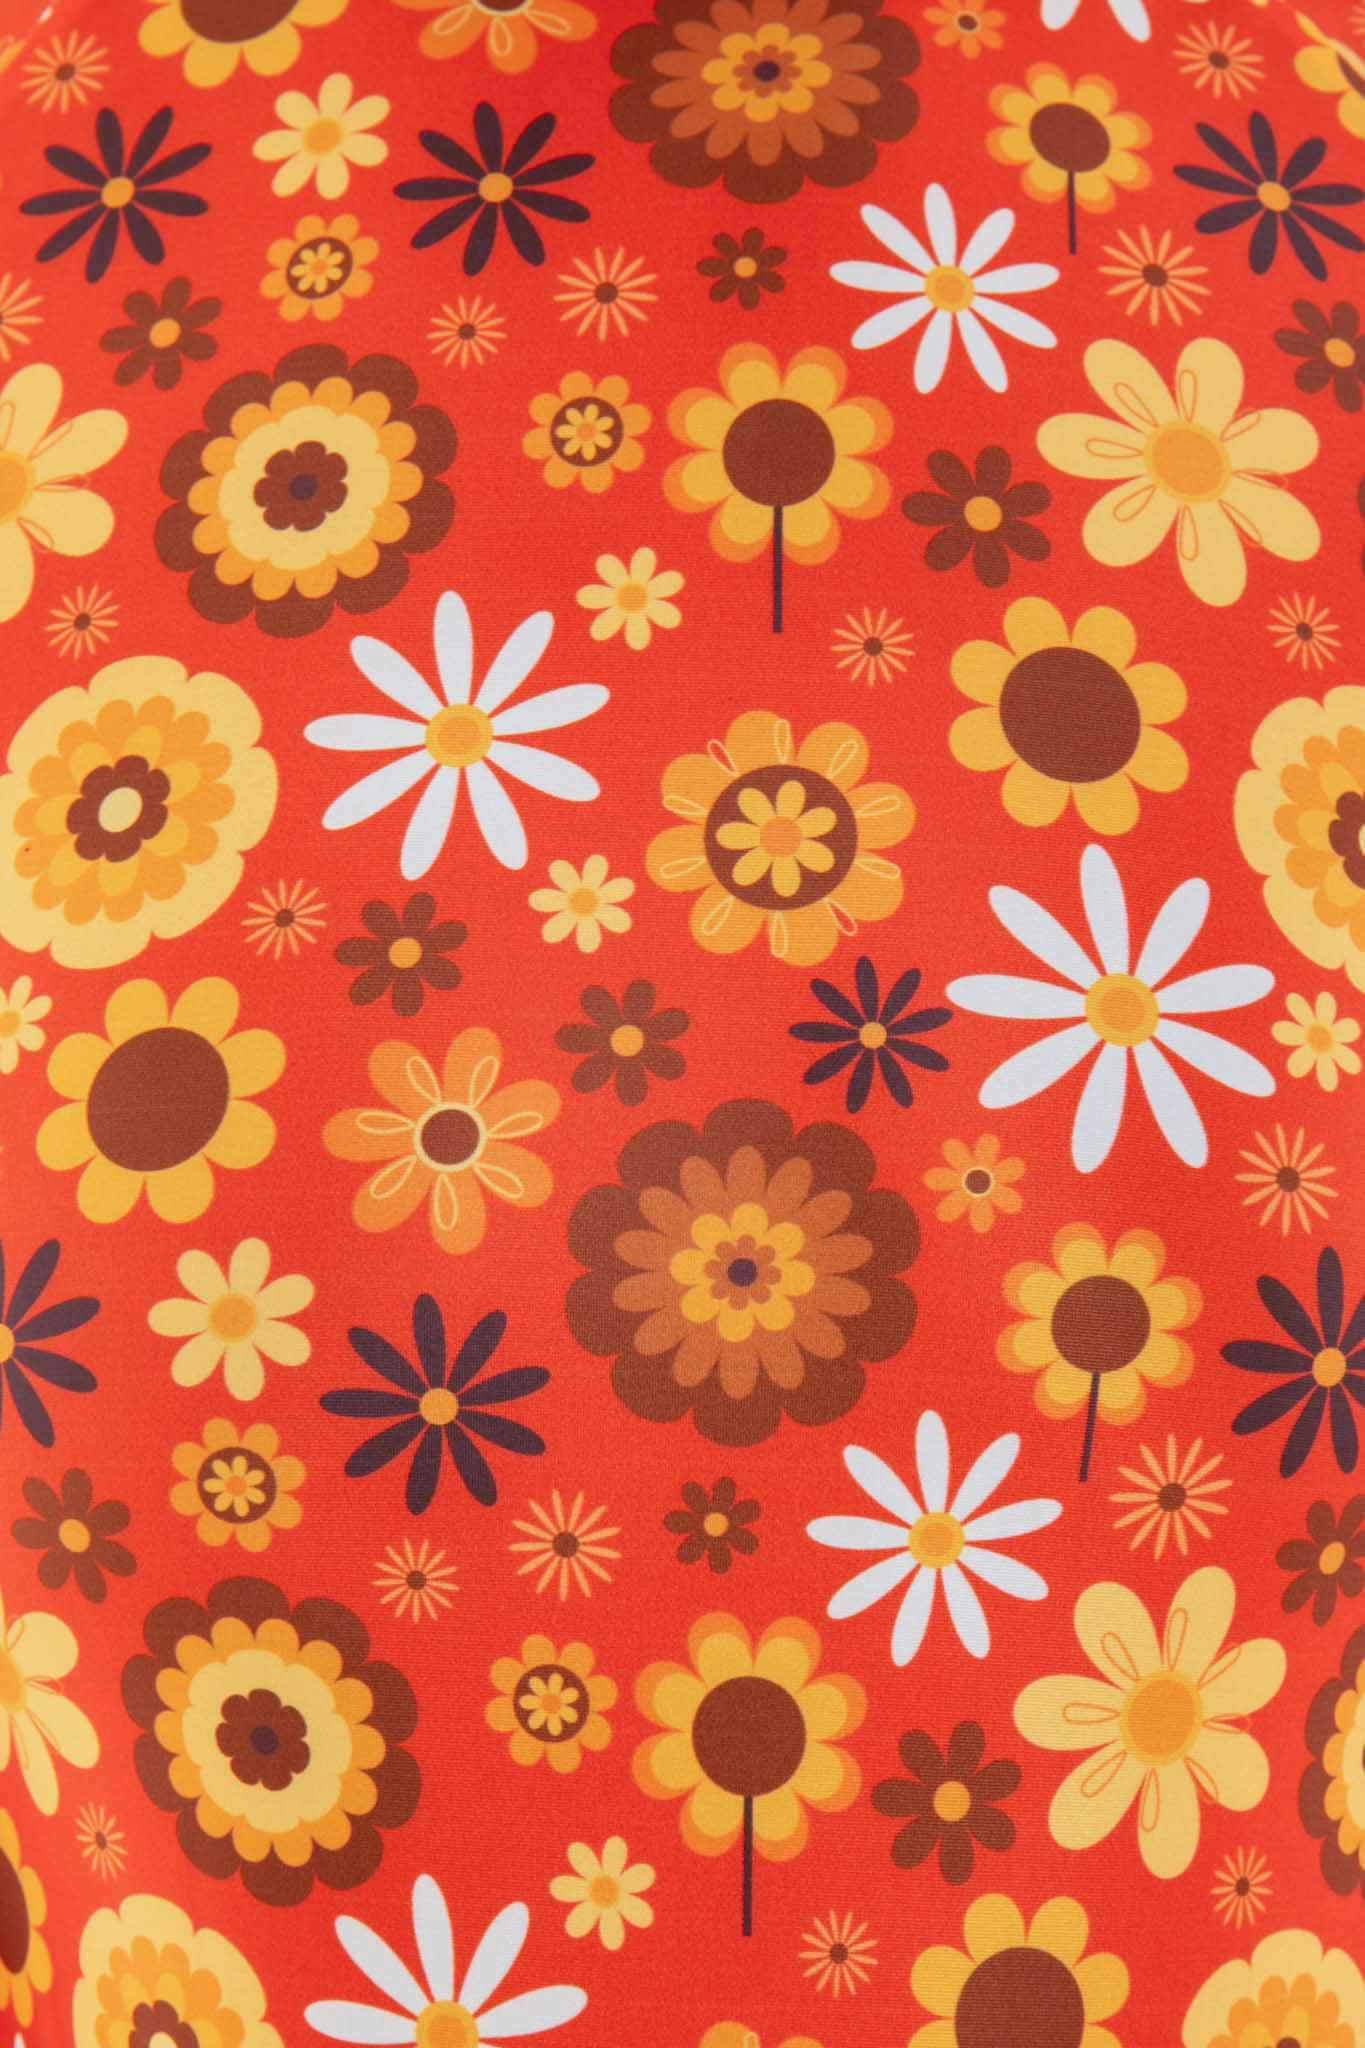 Close-up of the red retro floral print